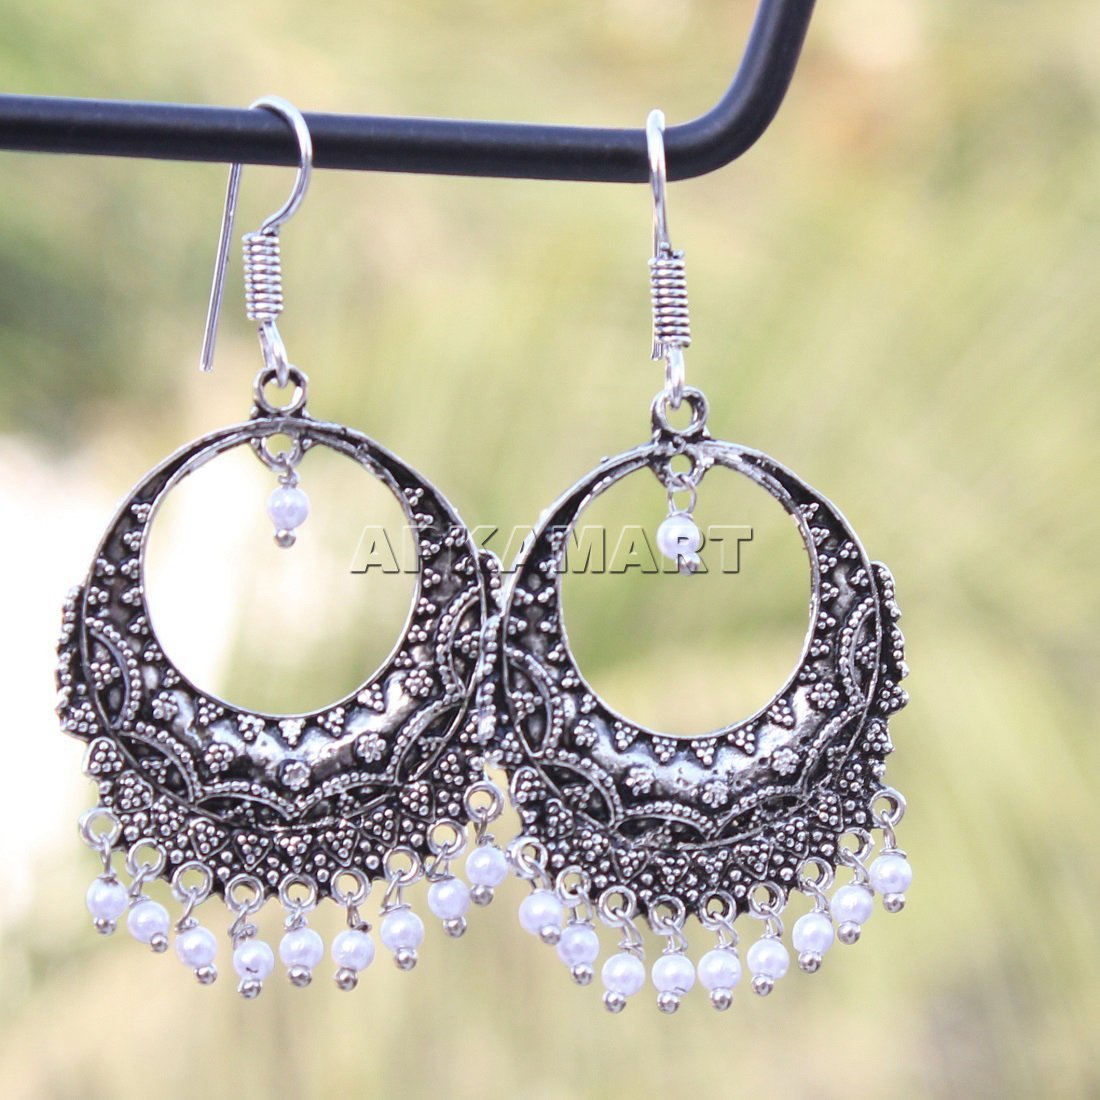 Earrings - Traditional Chand Bali with White Bead - Jewellery For Women & Girls - ApkaMart